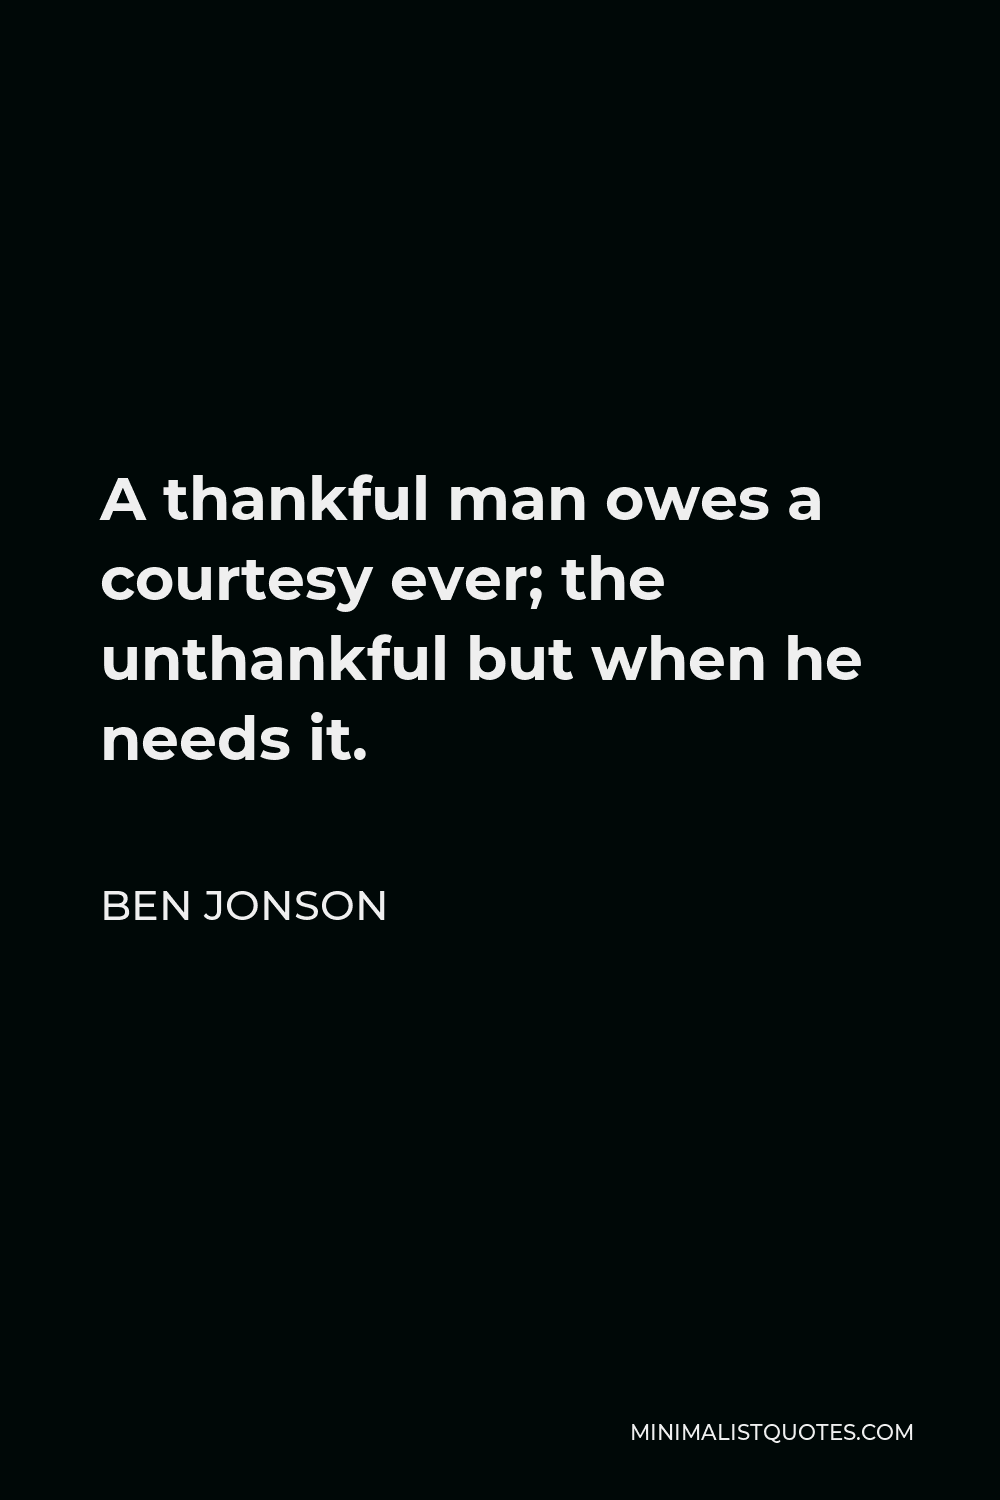 Ben Jonson Quote - A thankful man owes a courtesy ever; the unthankful but when he needs it.